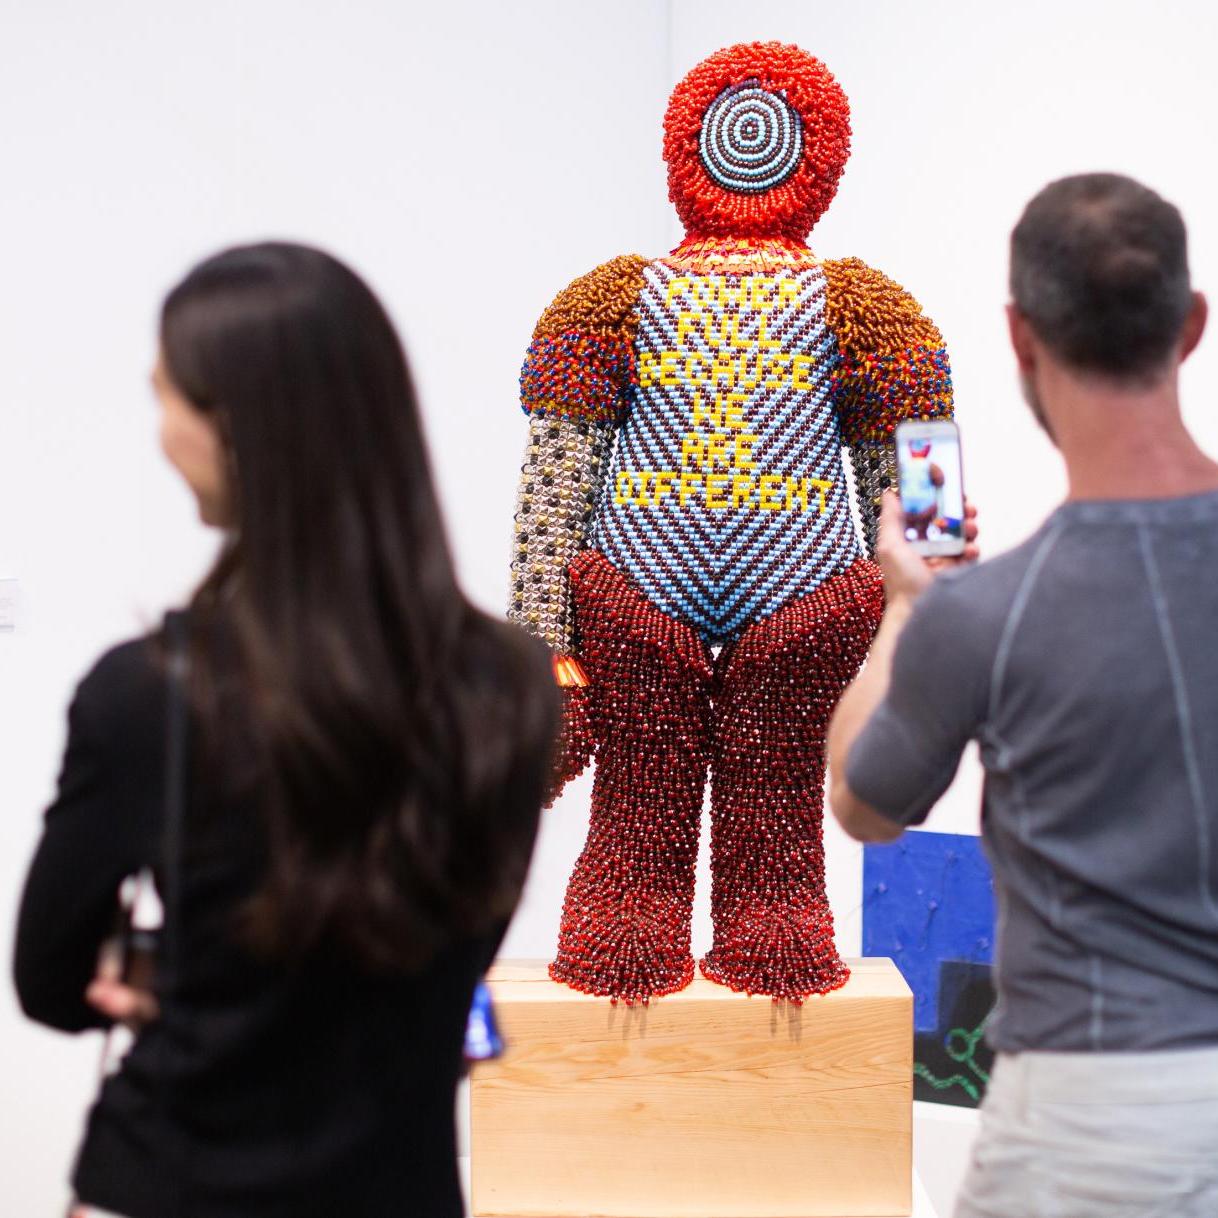 The Armory Show Withstands the Epidemic - Fairs